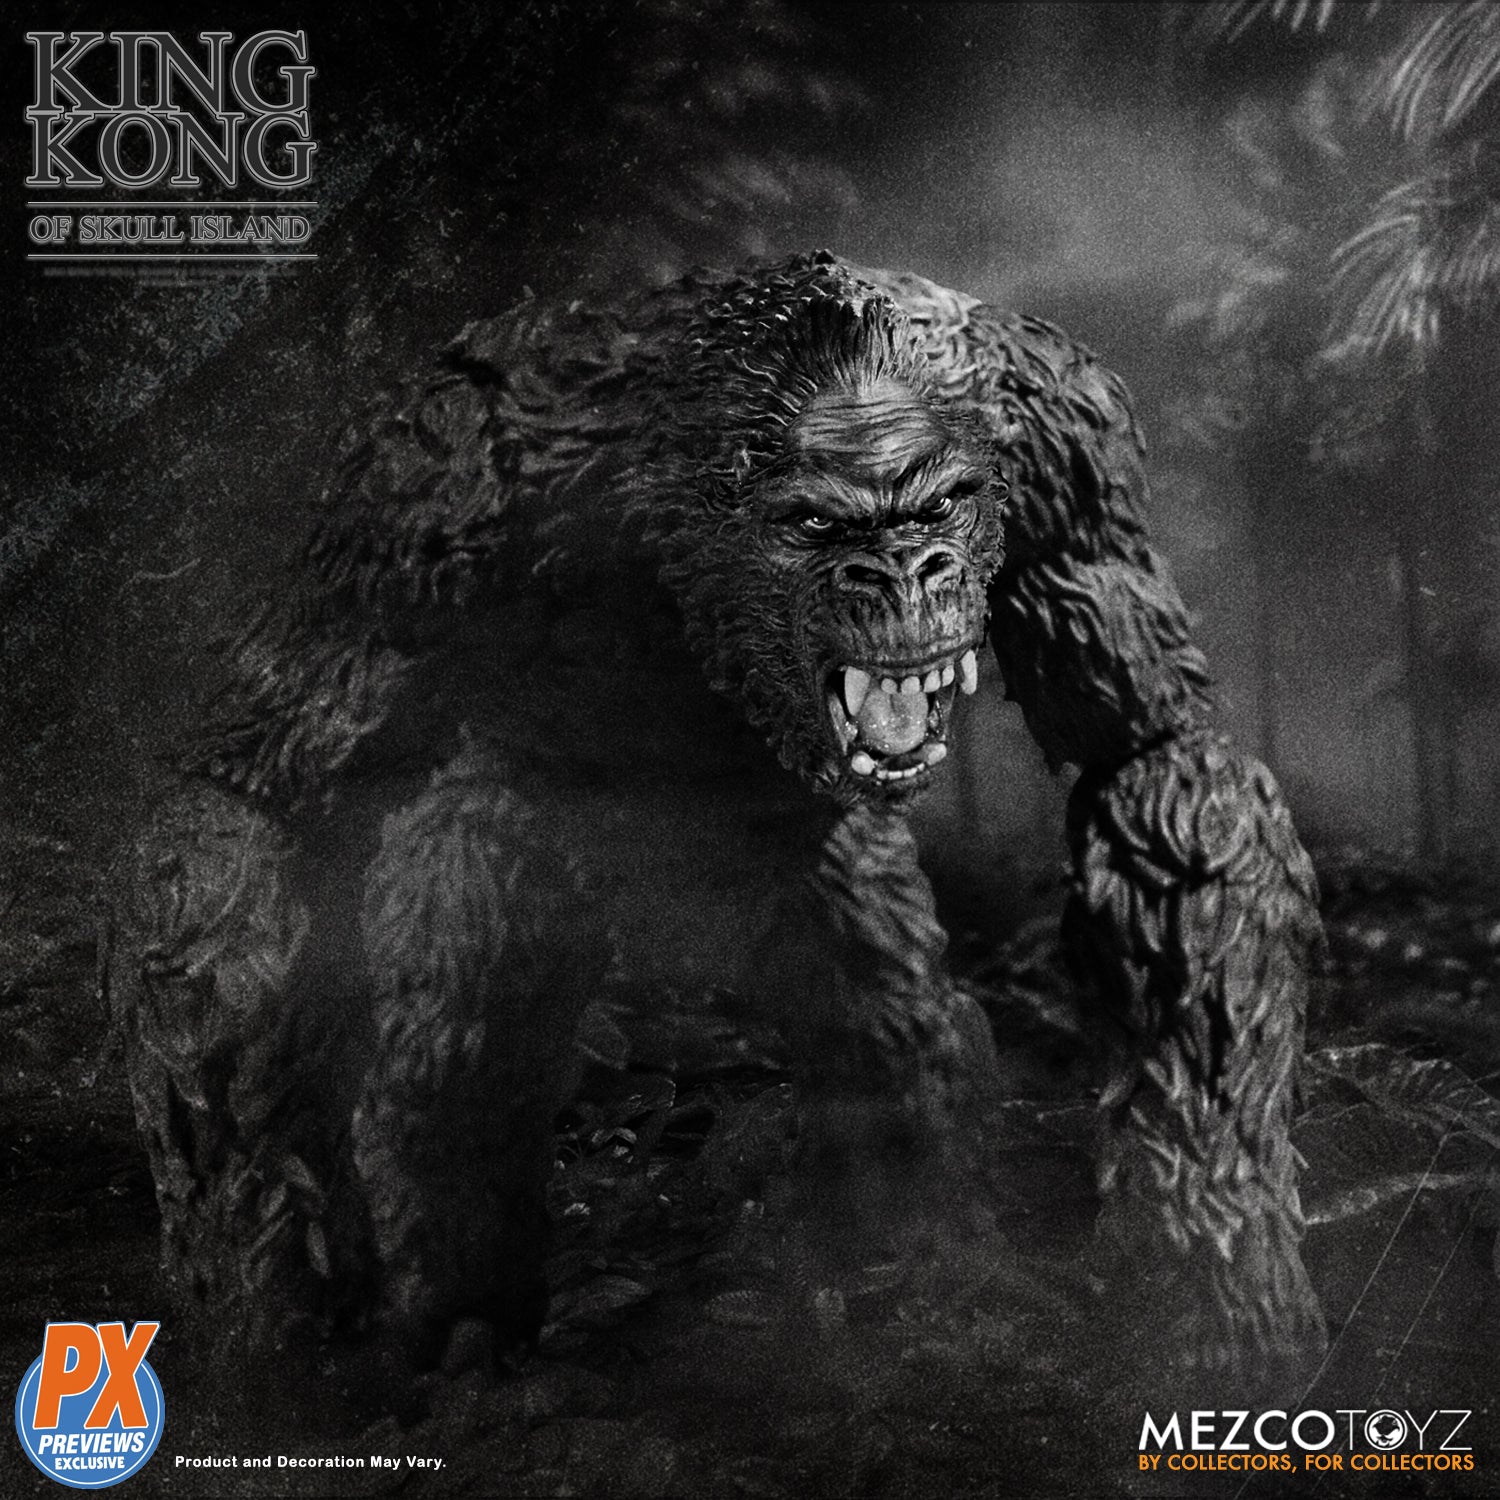 Mezco - King Kong of Skull Island B&W Version (Previews Exclusive) - Marvelous Toys